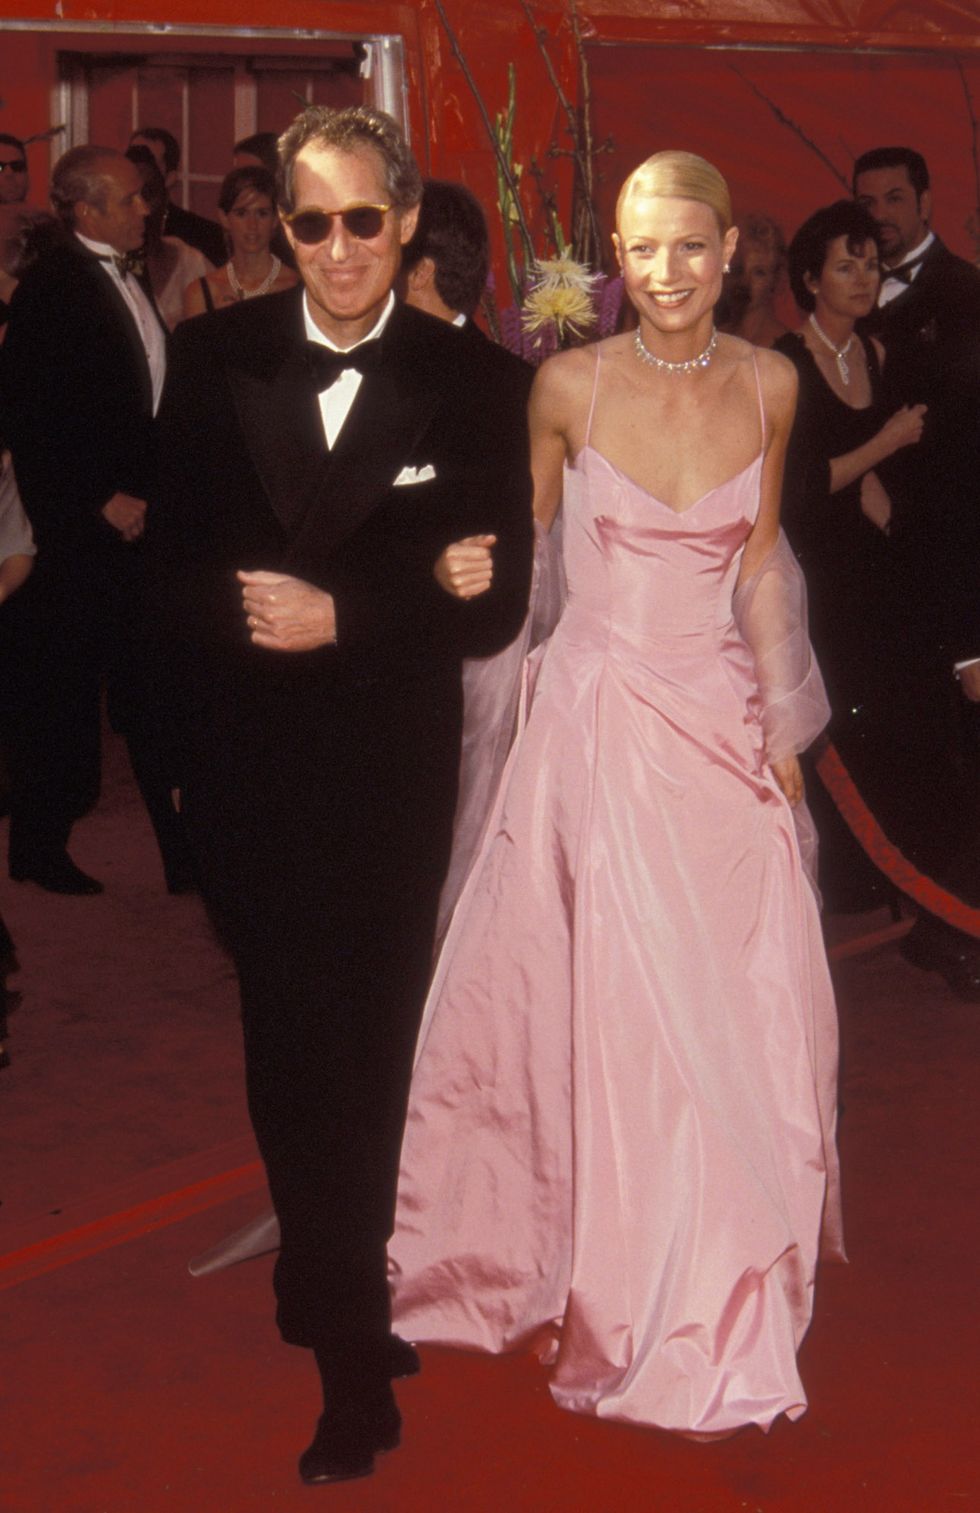 gwyneth paltrow and bruce paltrow during 71st annual academy awards arrivals at dorothy chandler pavilion in los angeles, california, united states photo by ron galellaron galella collection via getty images